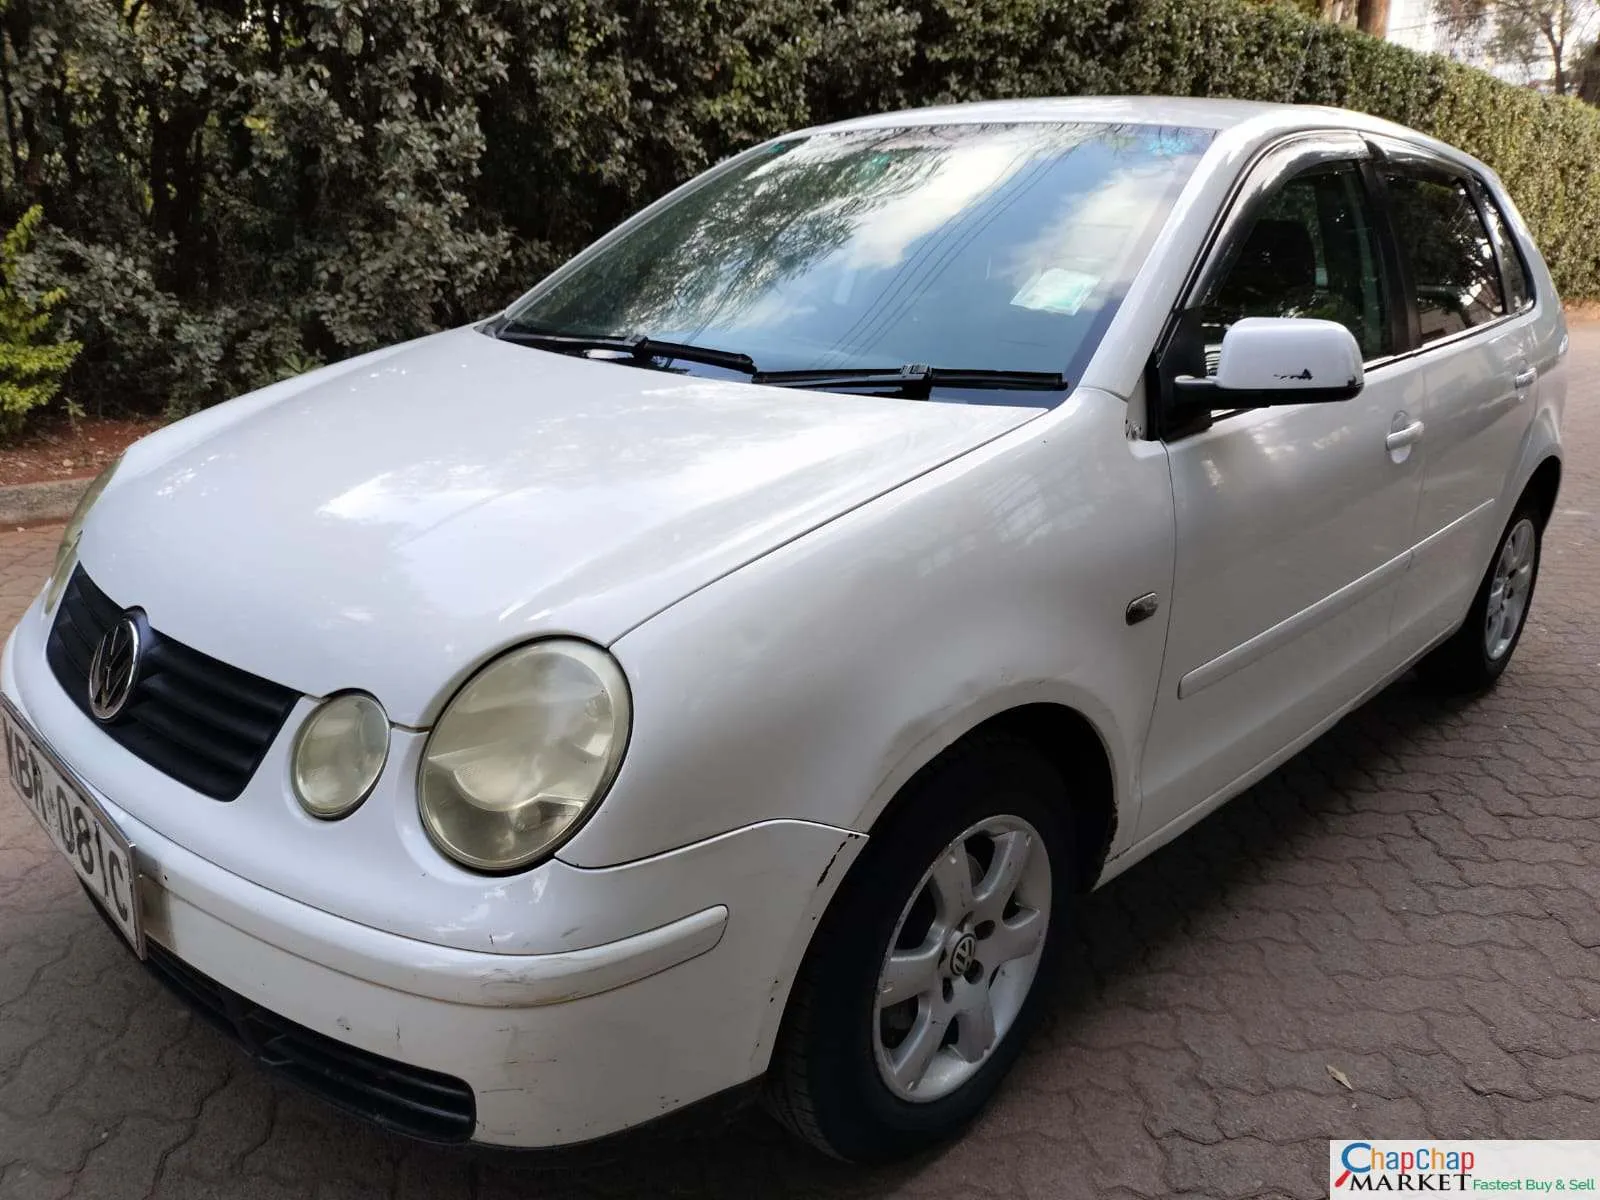 Cars Cars For Sale/Vehicles-Volkswagen Polo for sale in Kenya QUICK SALE You Pay 30% Deposit Trade in Ok EXCLUSIVE 9